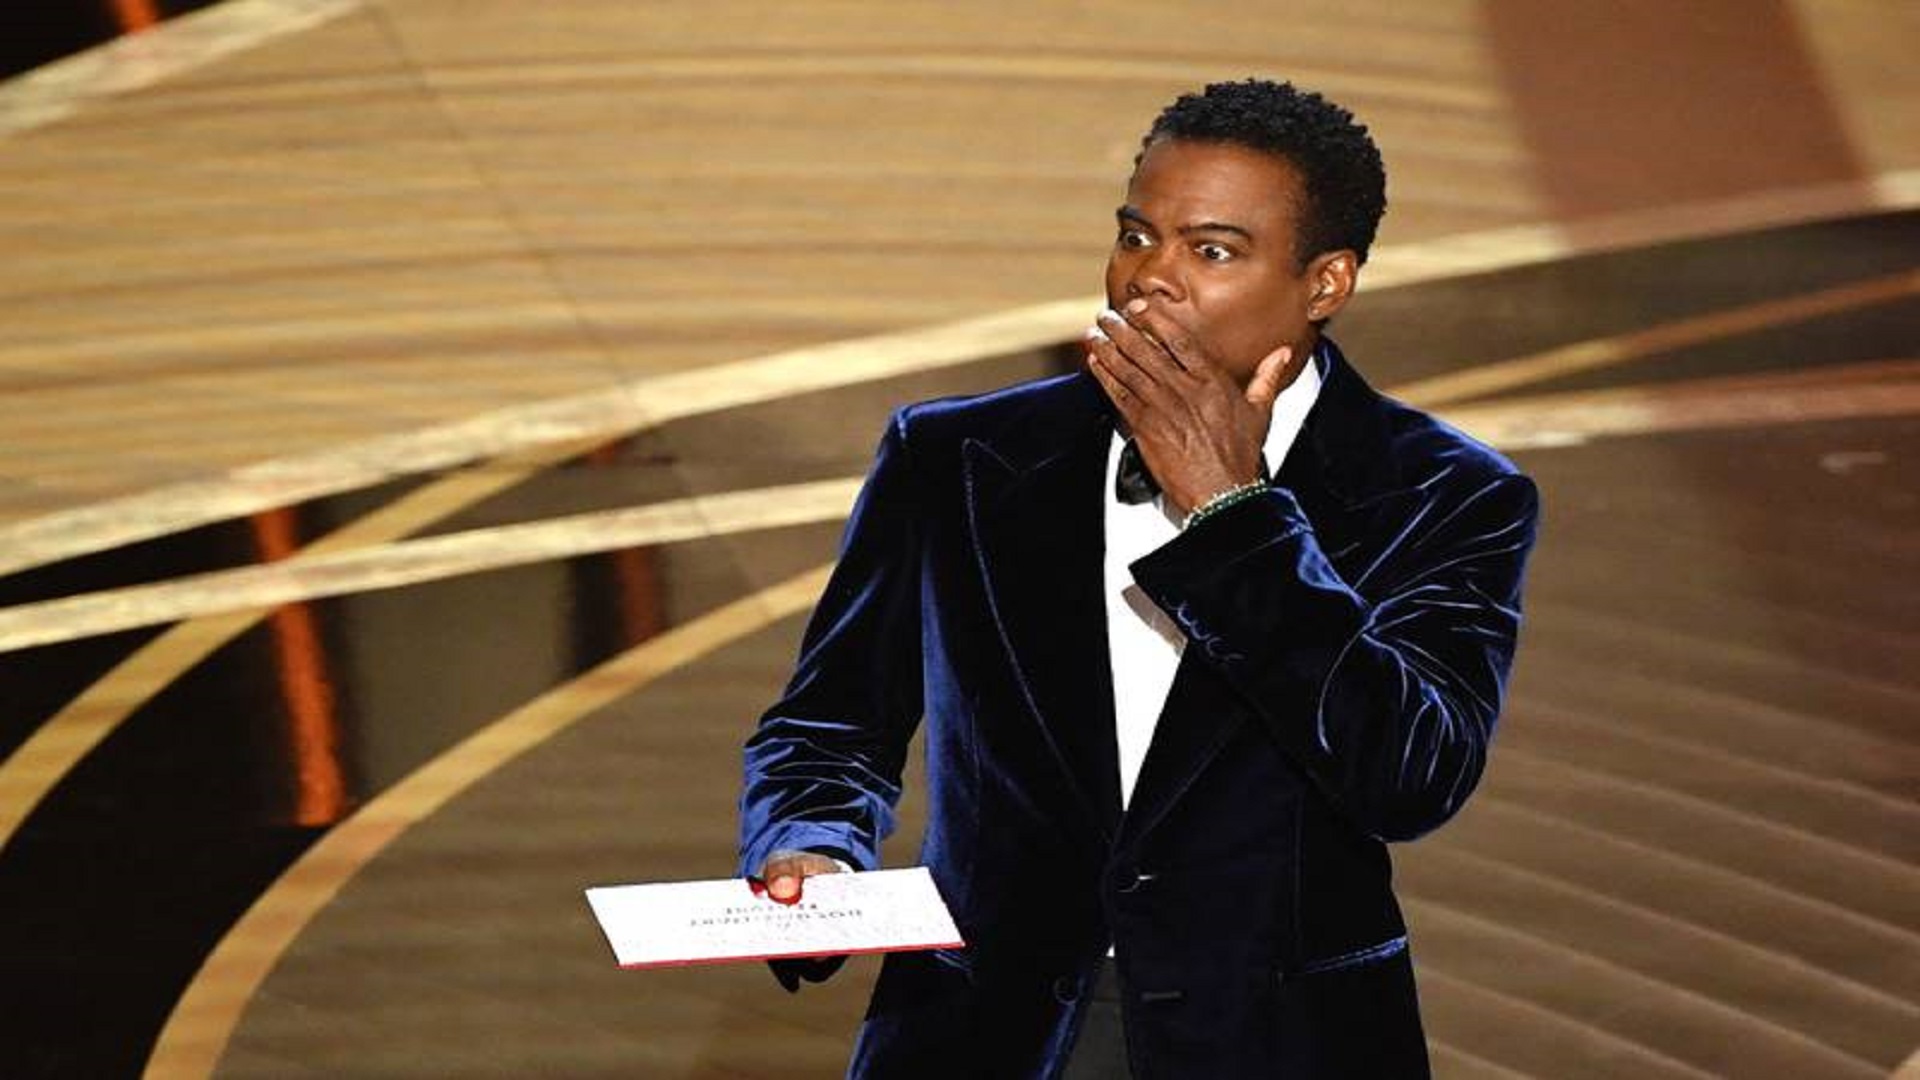  Chris Rock speaks onstage during the 94th Oscars at the Dolby Theatre in Hollywood. AFP